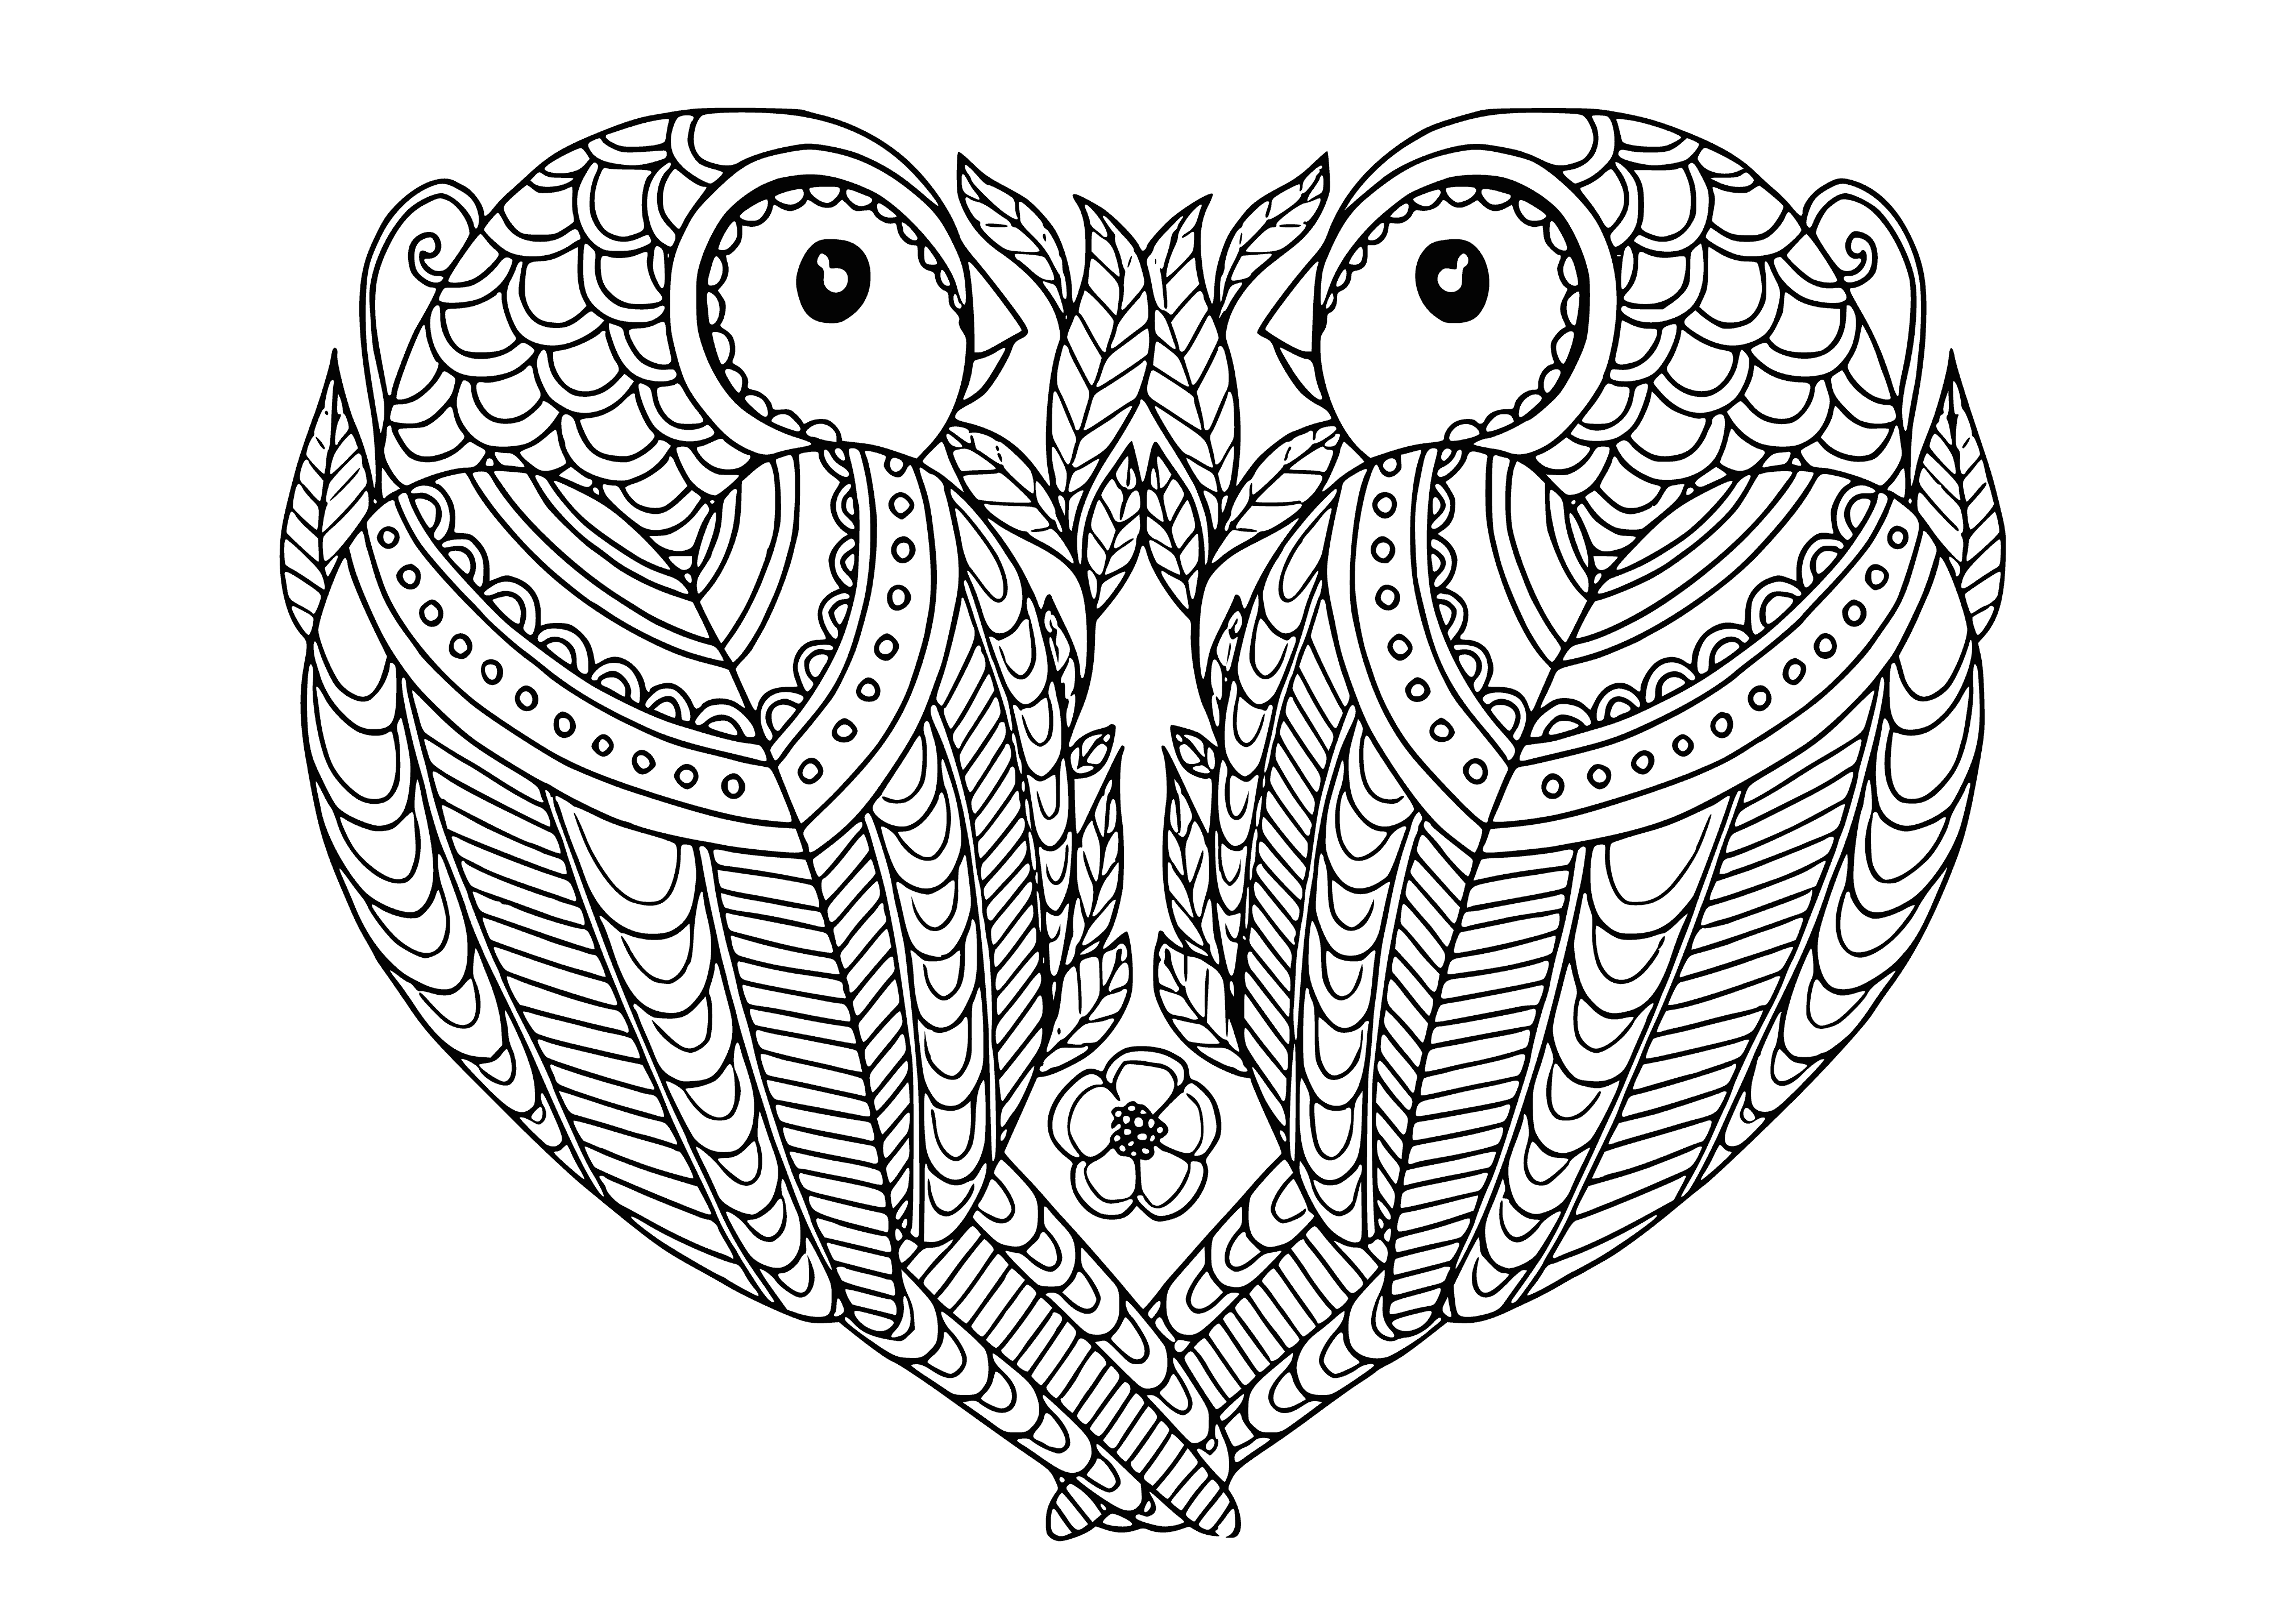 coloring page: Central bird on coloring page has wings with patterns; surrounded by smaller birds with patterns & colors. Message at bottom reads "With love."